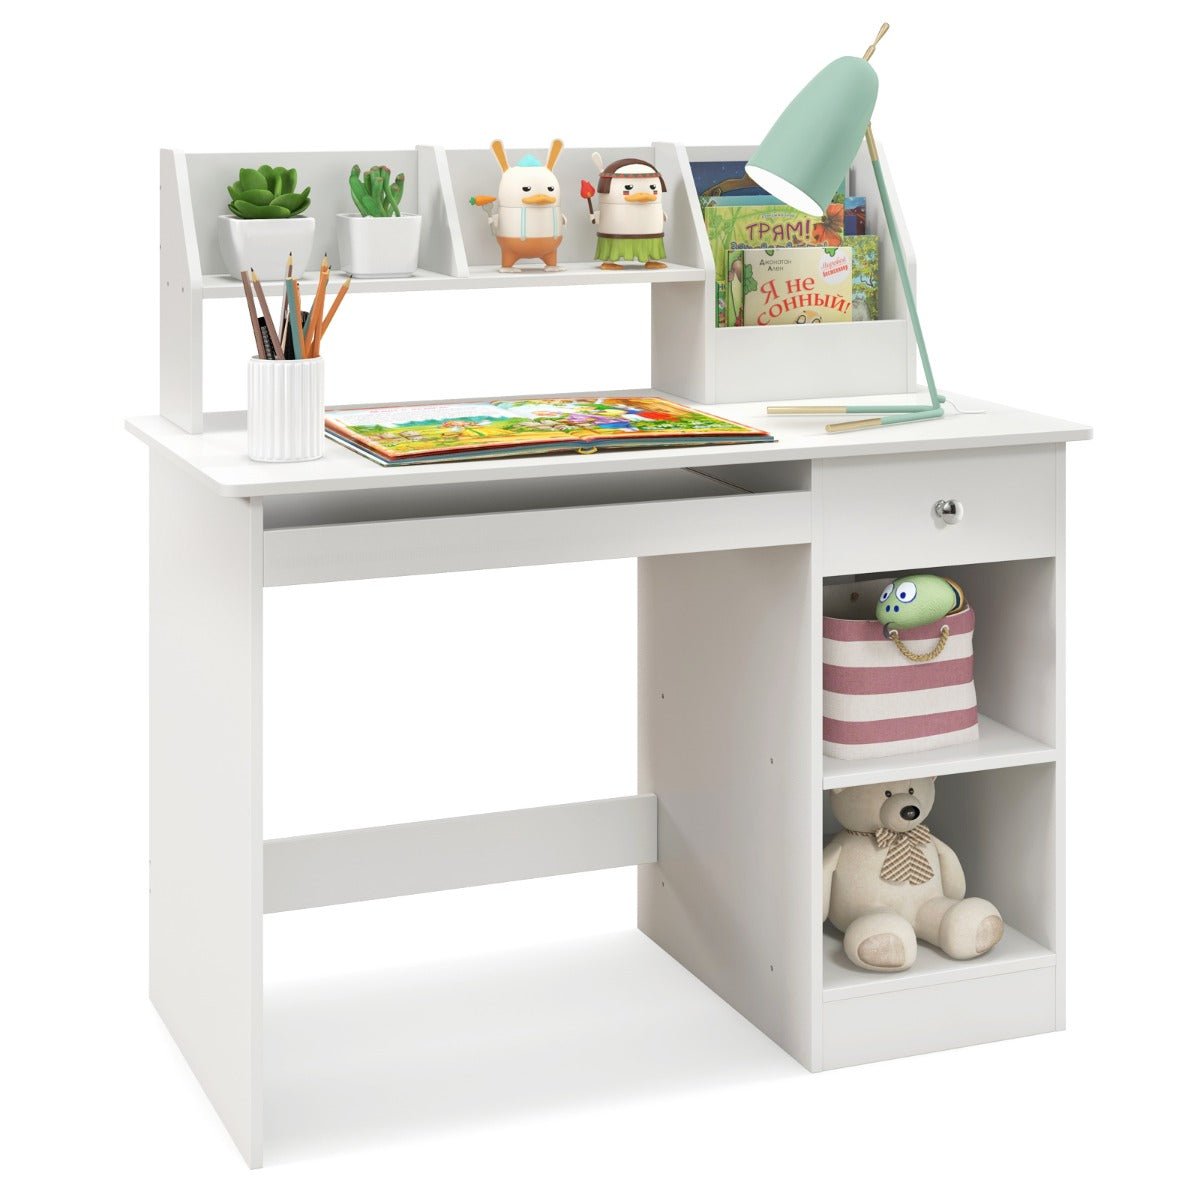 Kid-Friendly Desk with Organizing Shelves